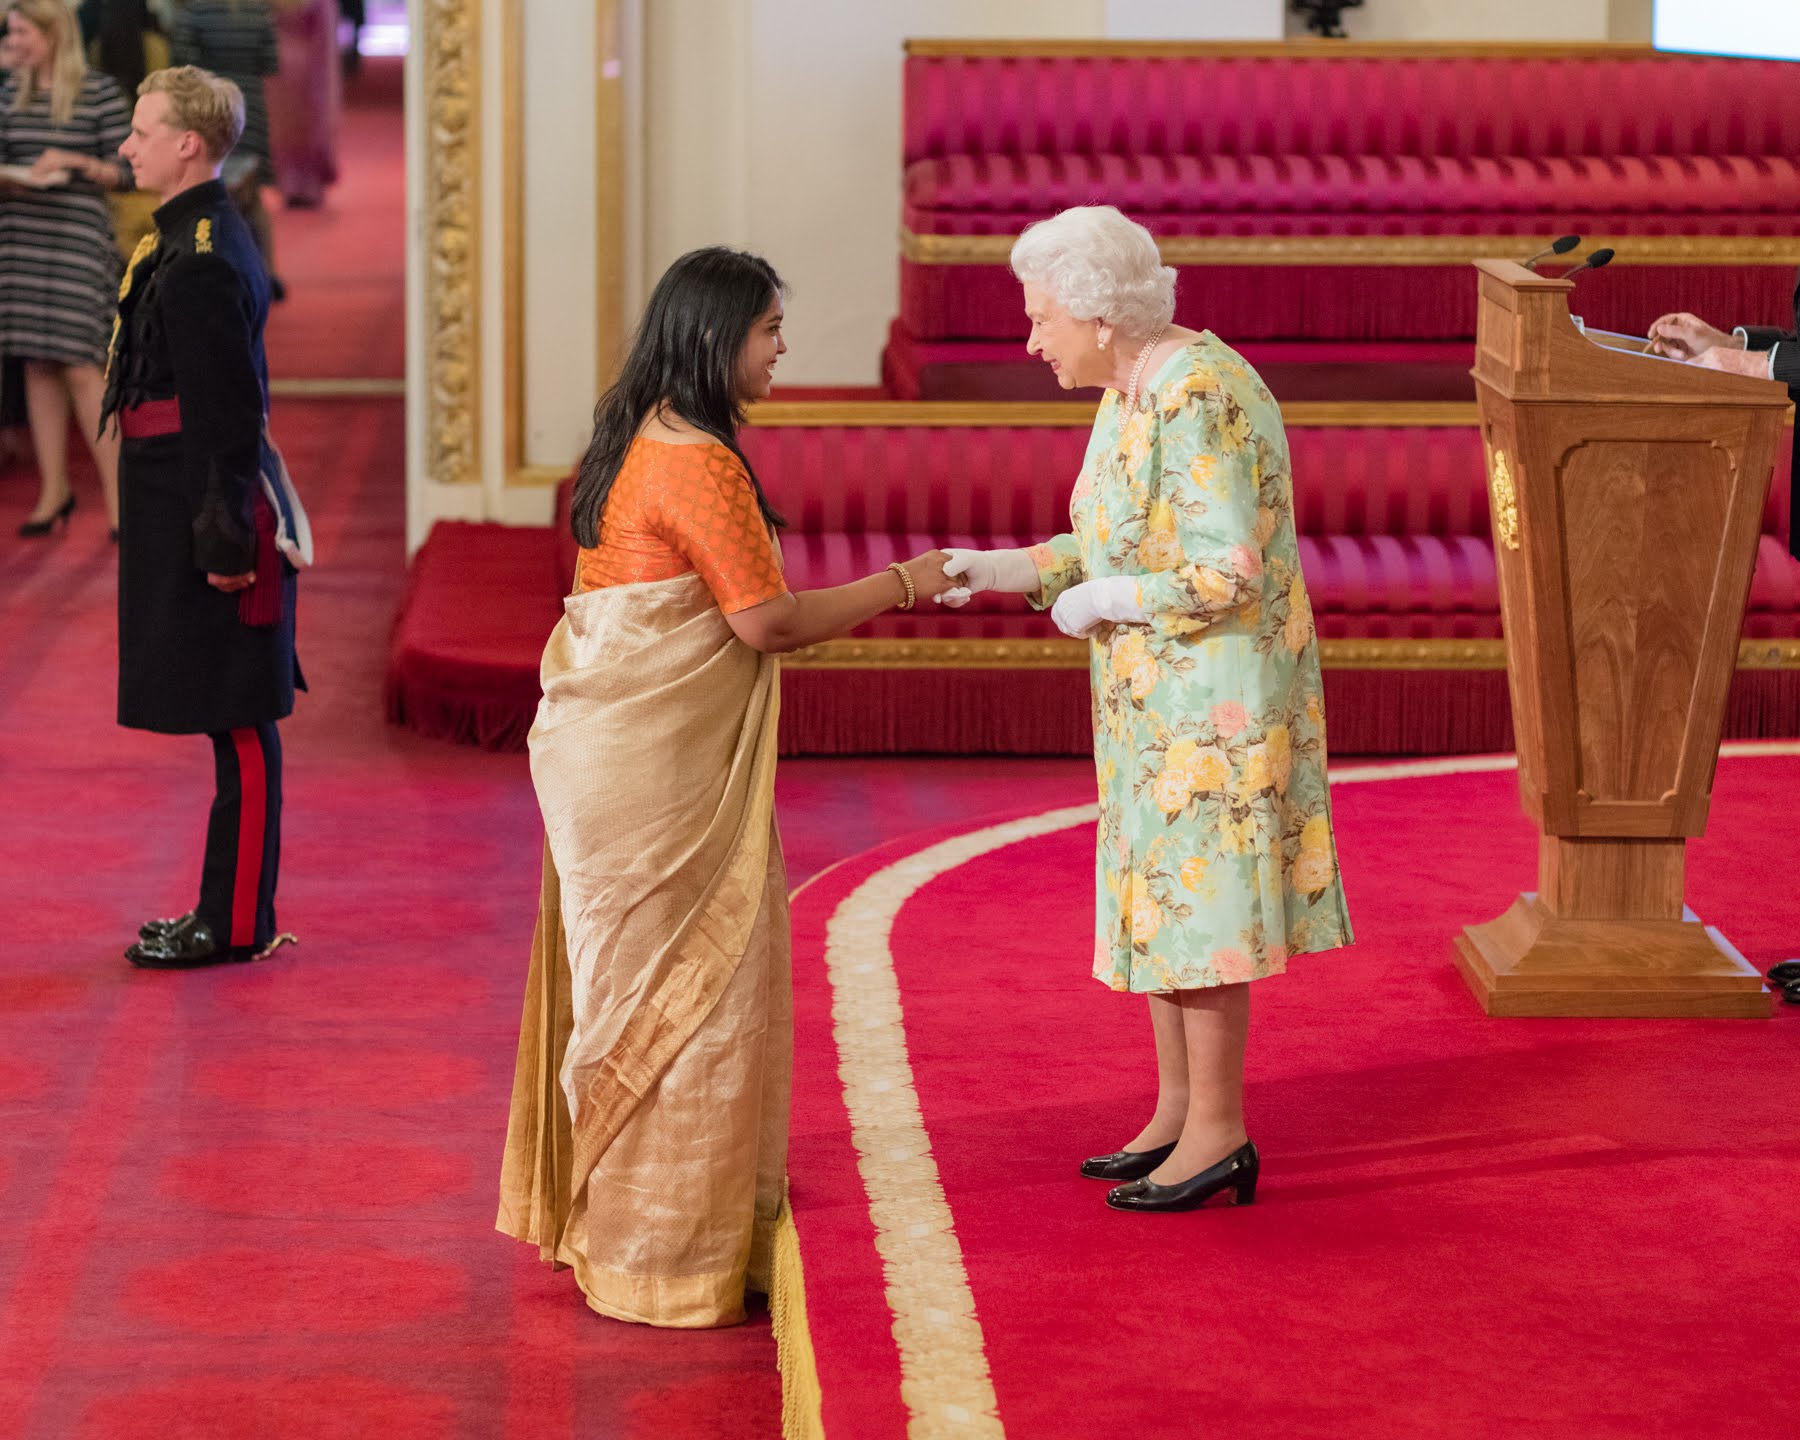 Deane De Menezes 2018 Queen's Young Leader from India